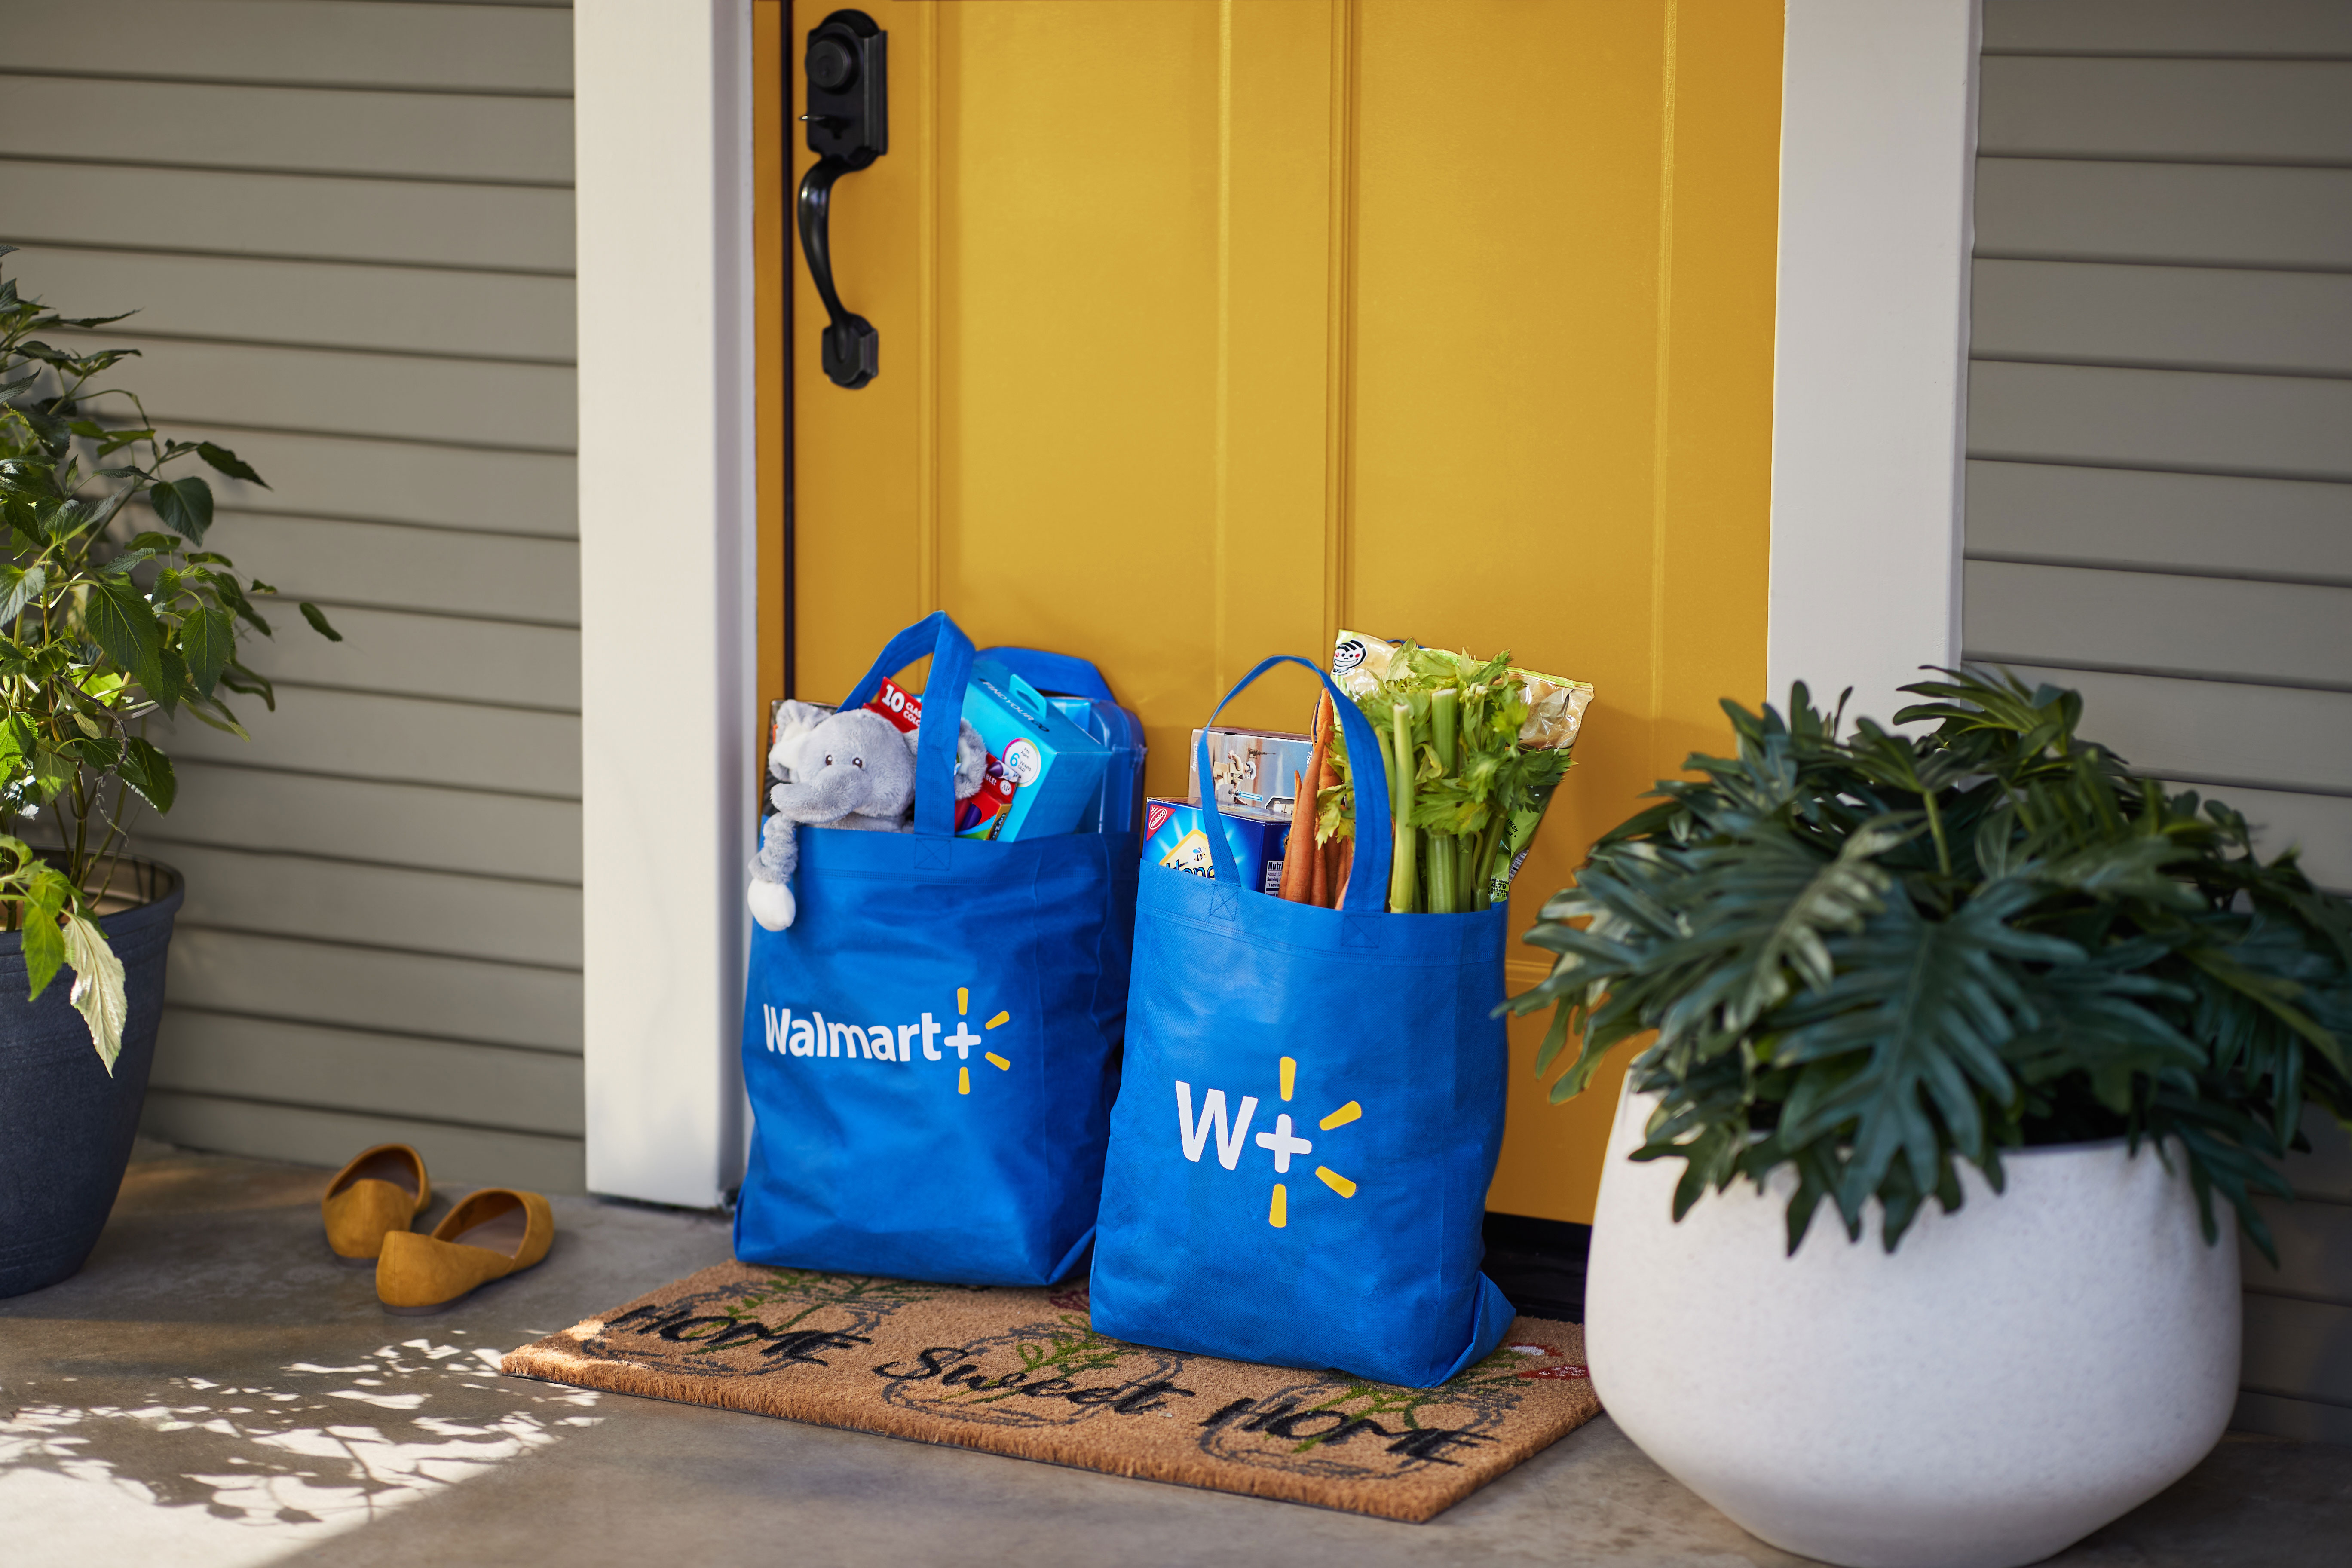 Two Walmart+ bags filled with groceries and other merchandise sit in front of the front door of a house.